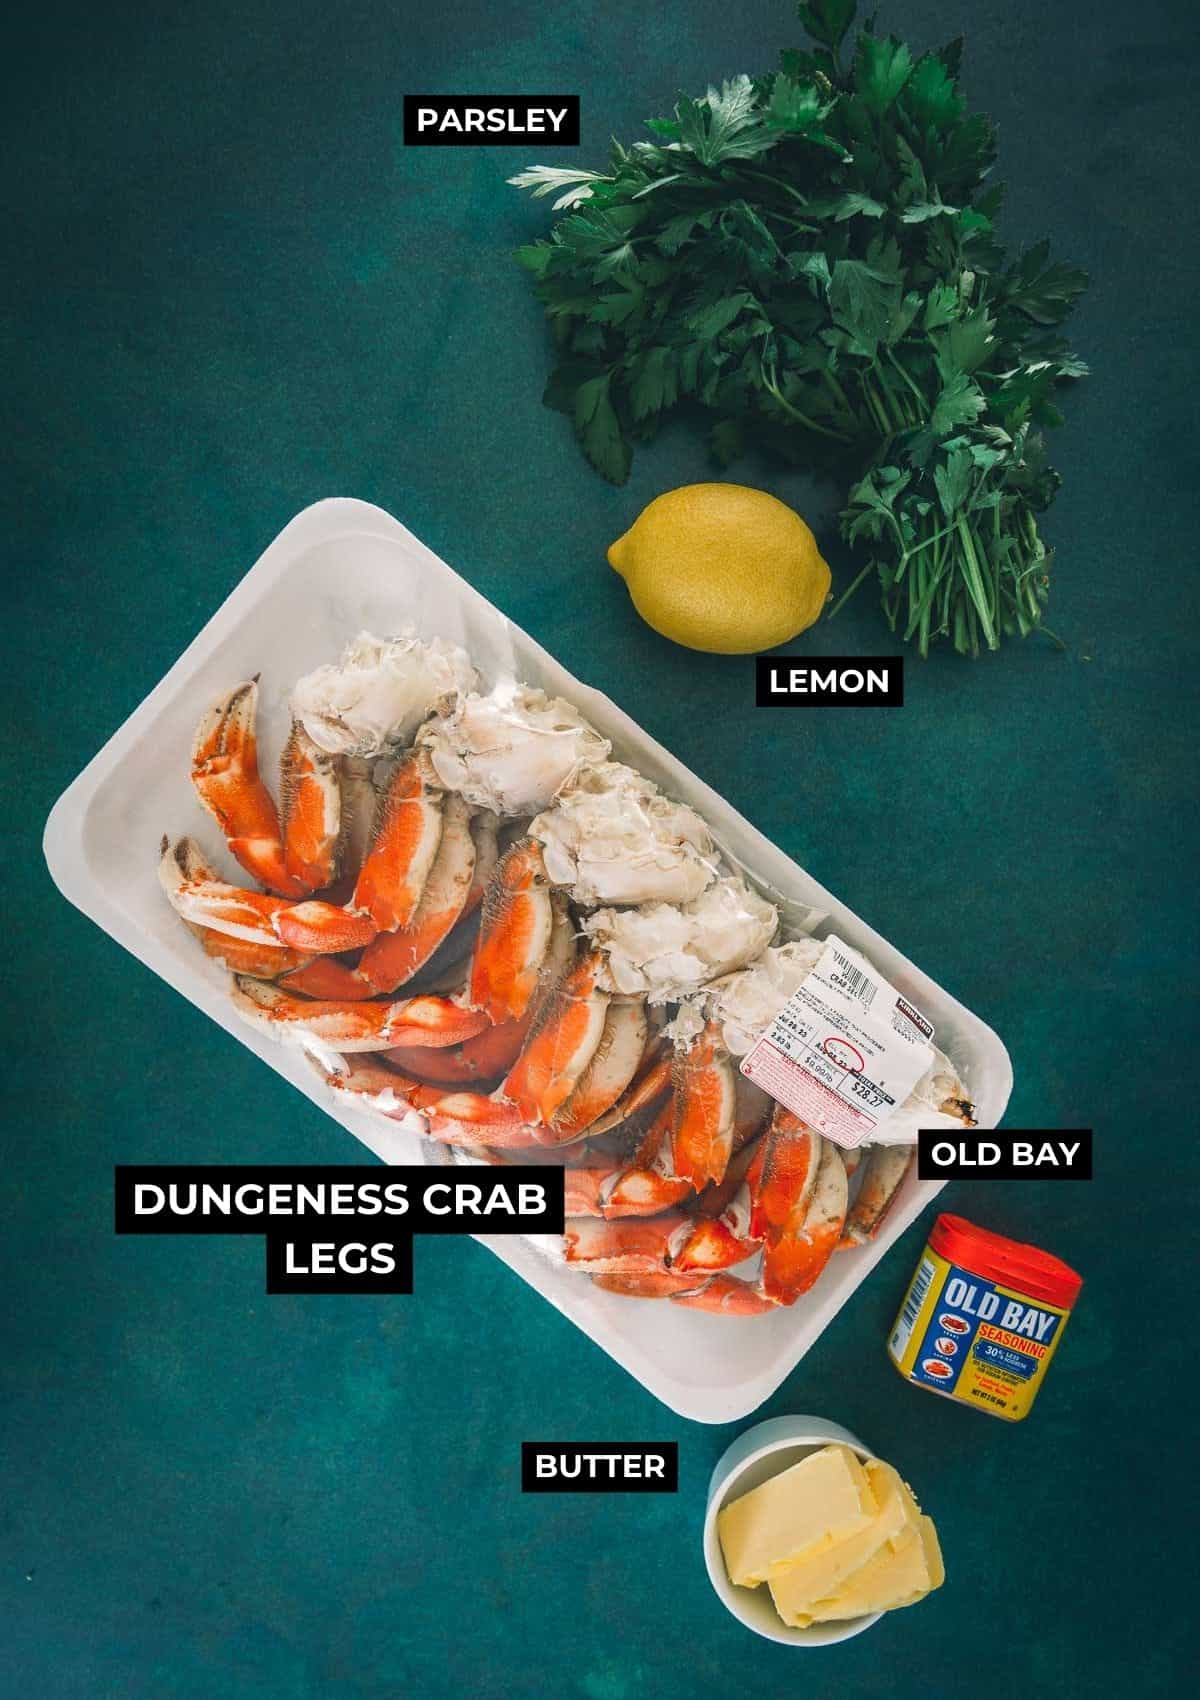 Ingredients for this crab recipe. 